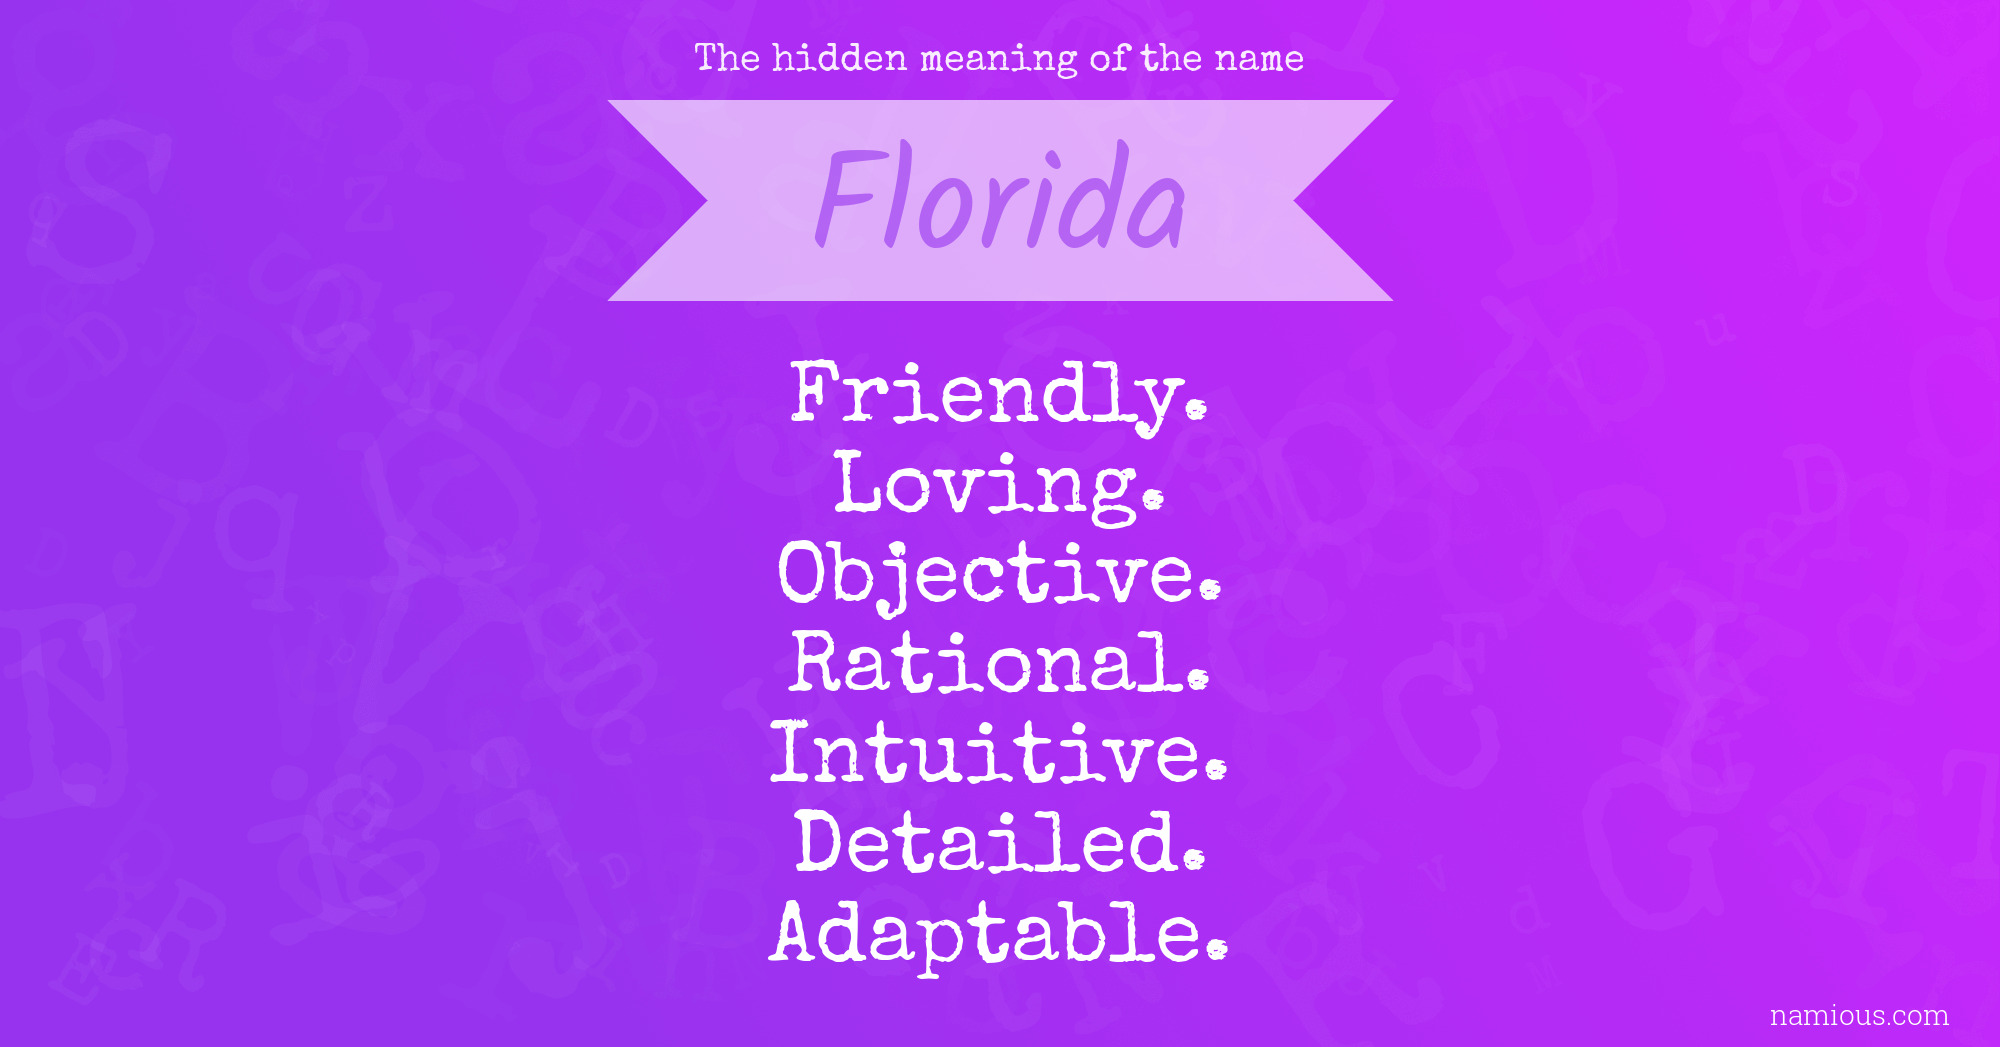 The hidden meaning of the name Florida